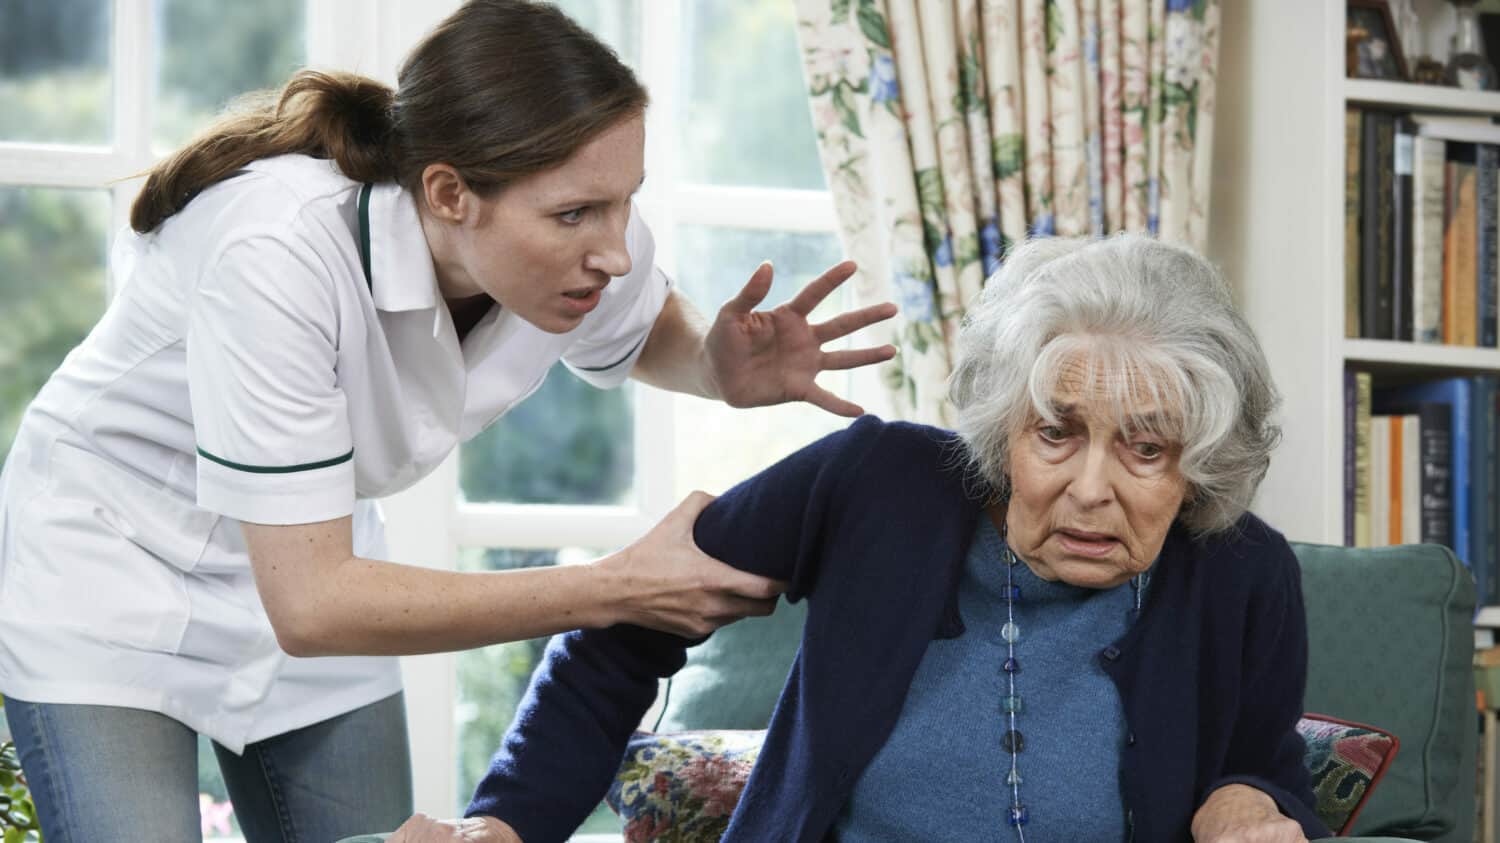 Essential Facts to Know about Elder Abuse